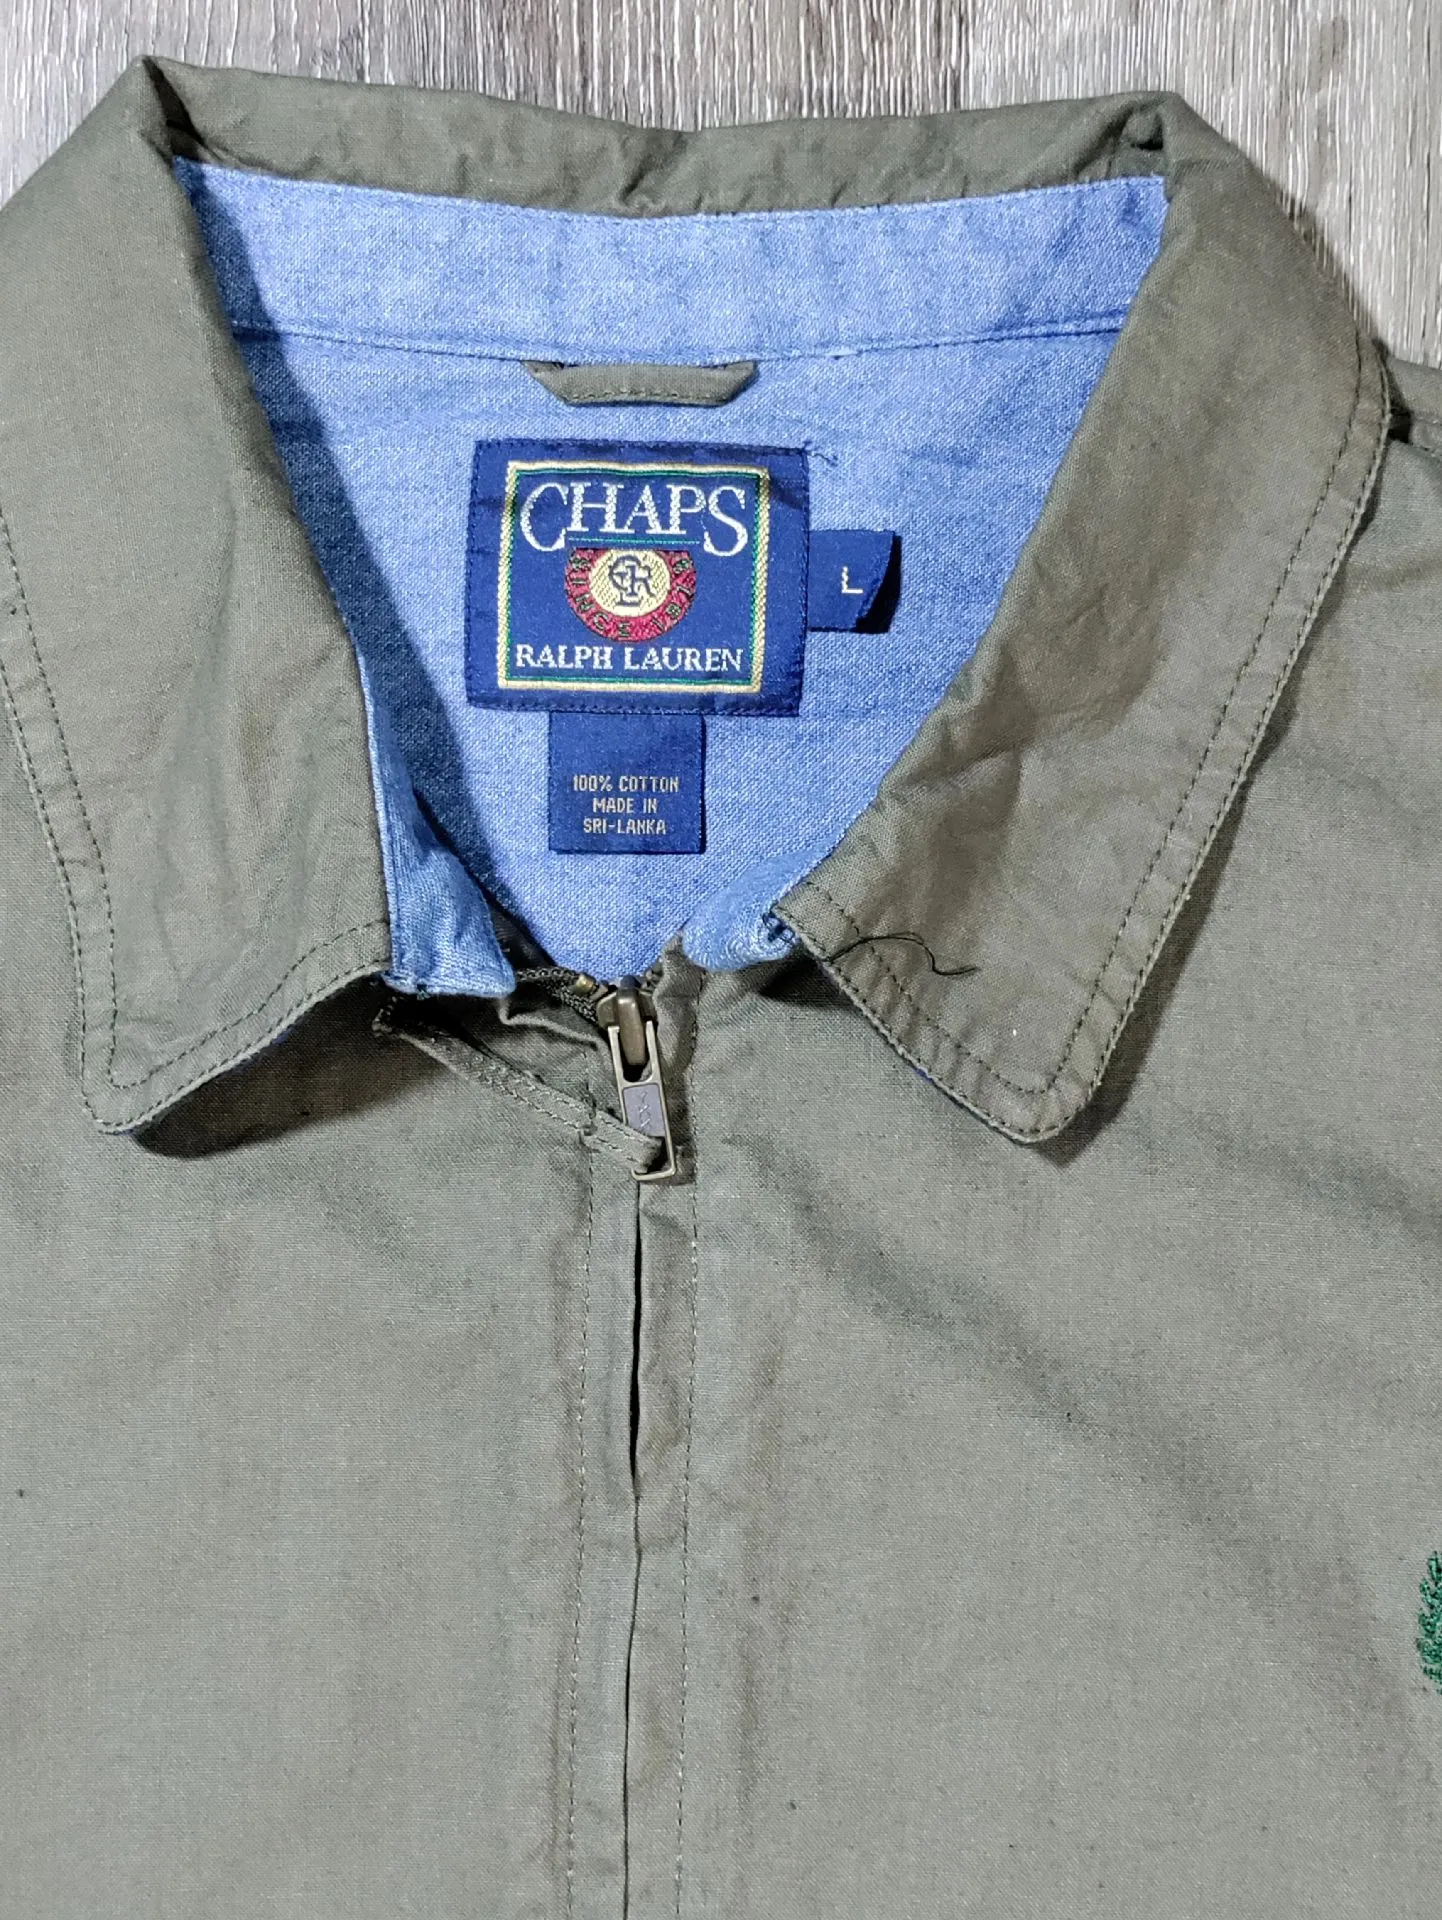 The Brand History of Chaps – Vintage Threads